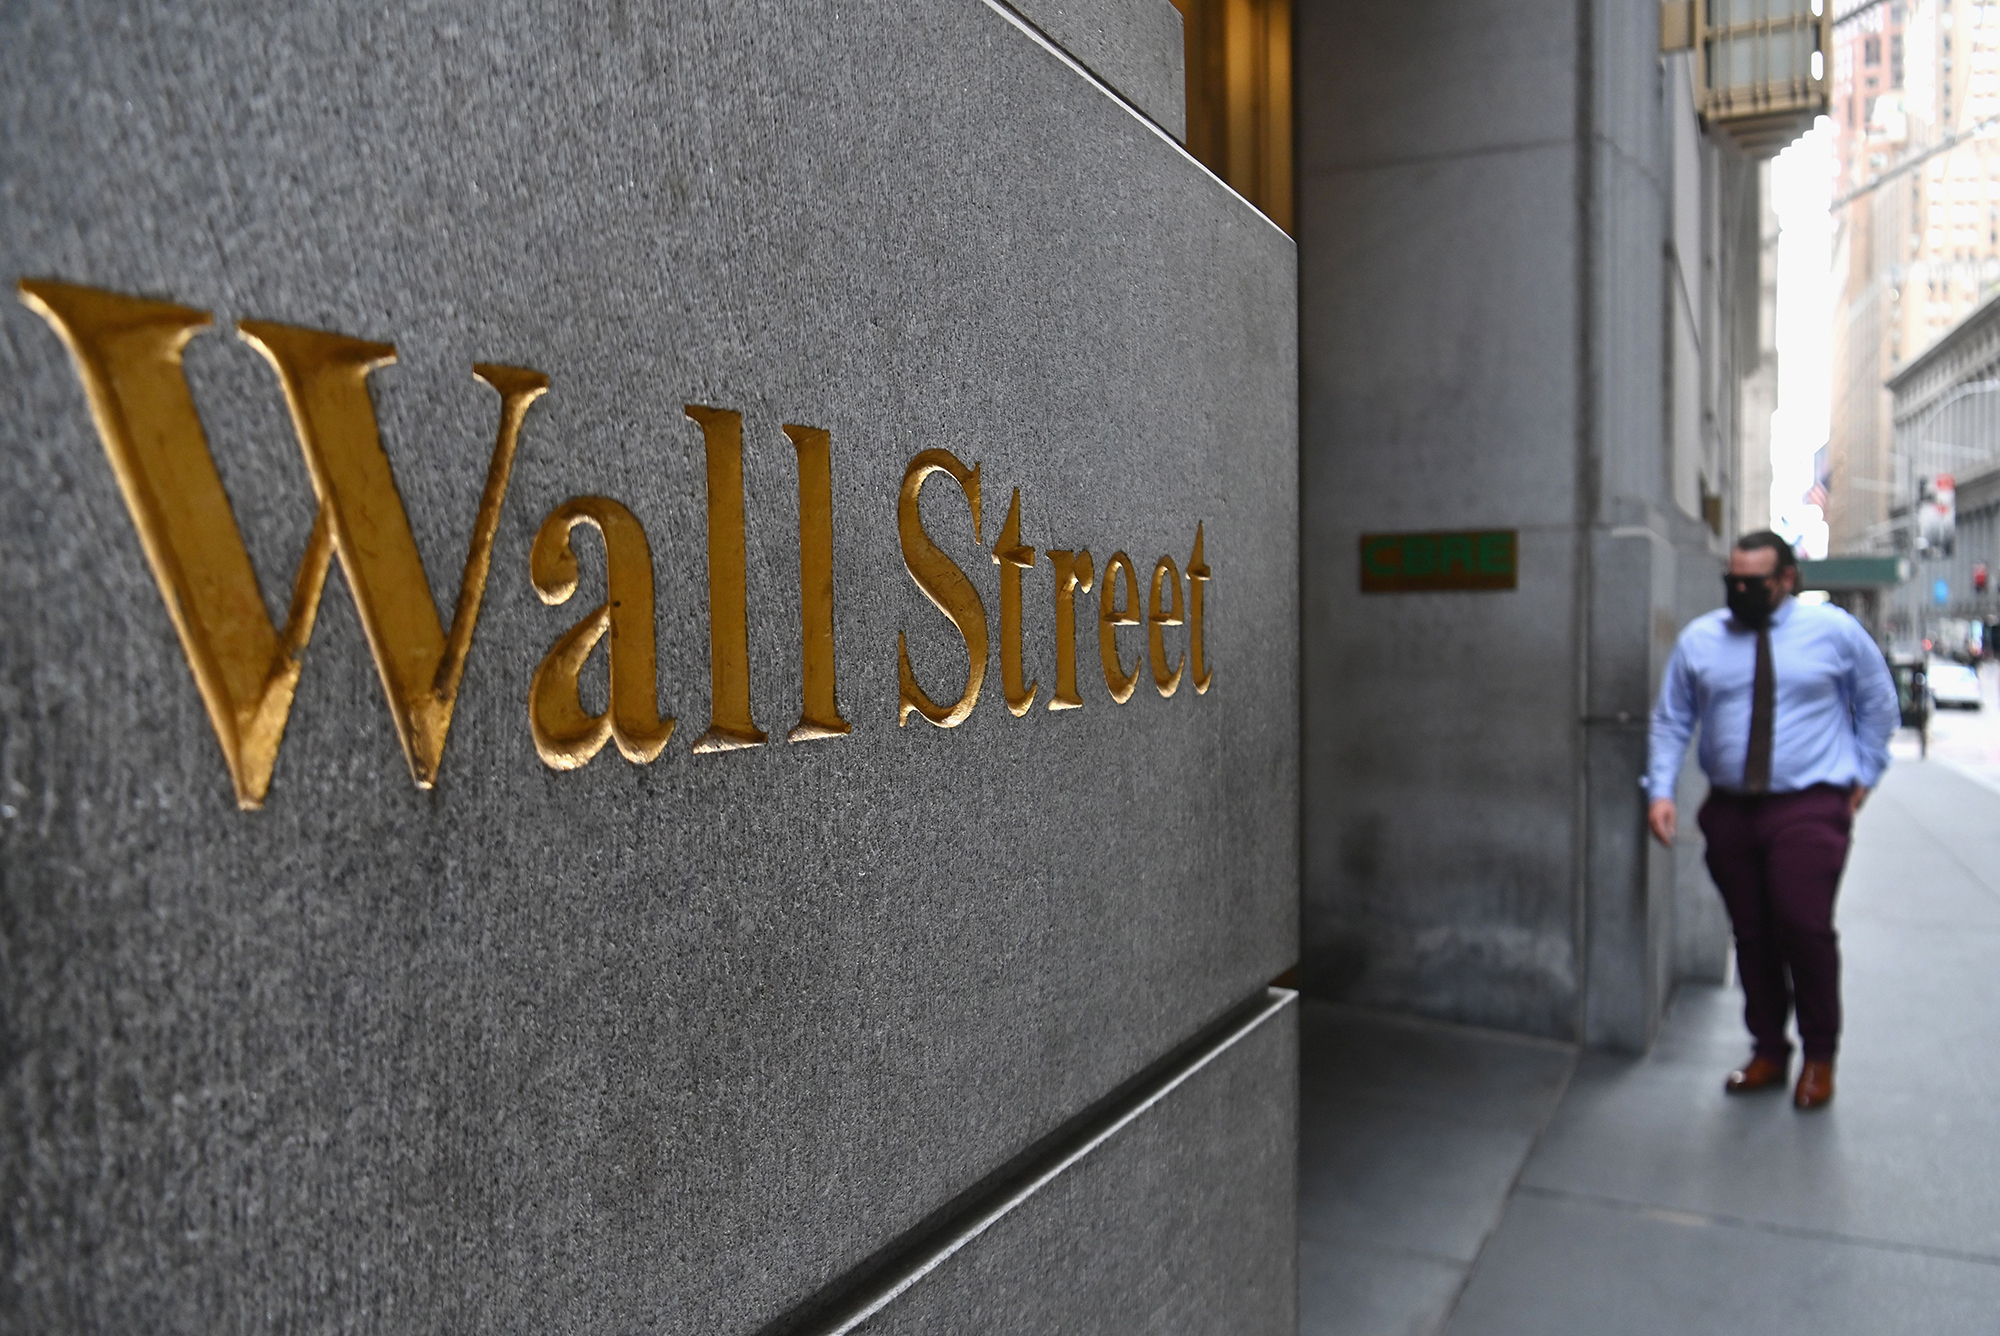 Wall Street have fluctuated below the record levels